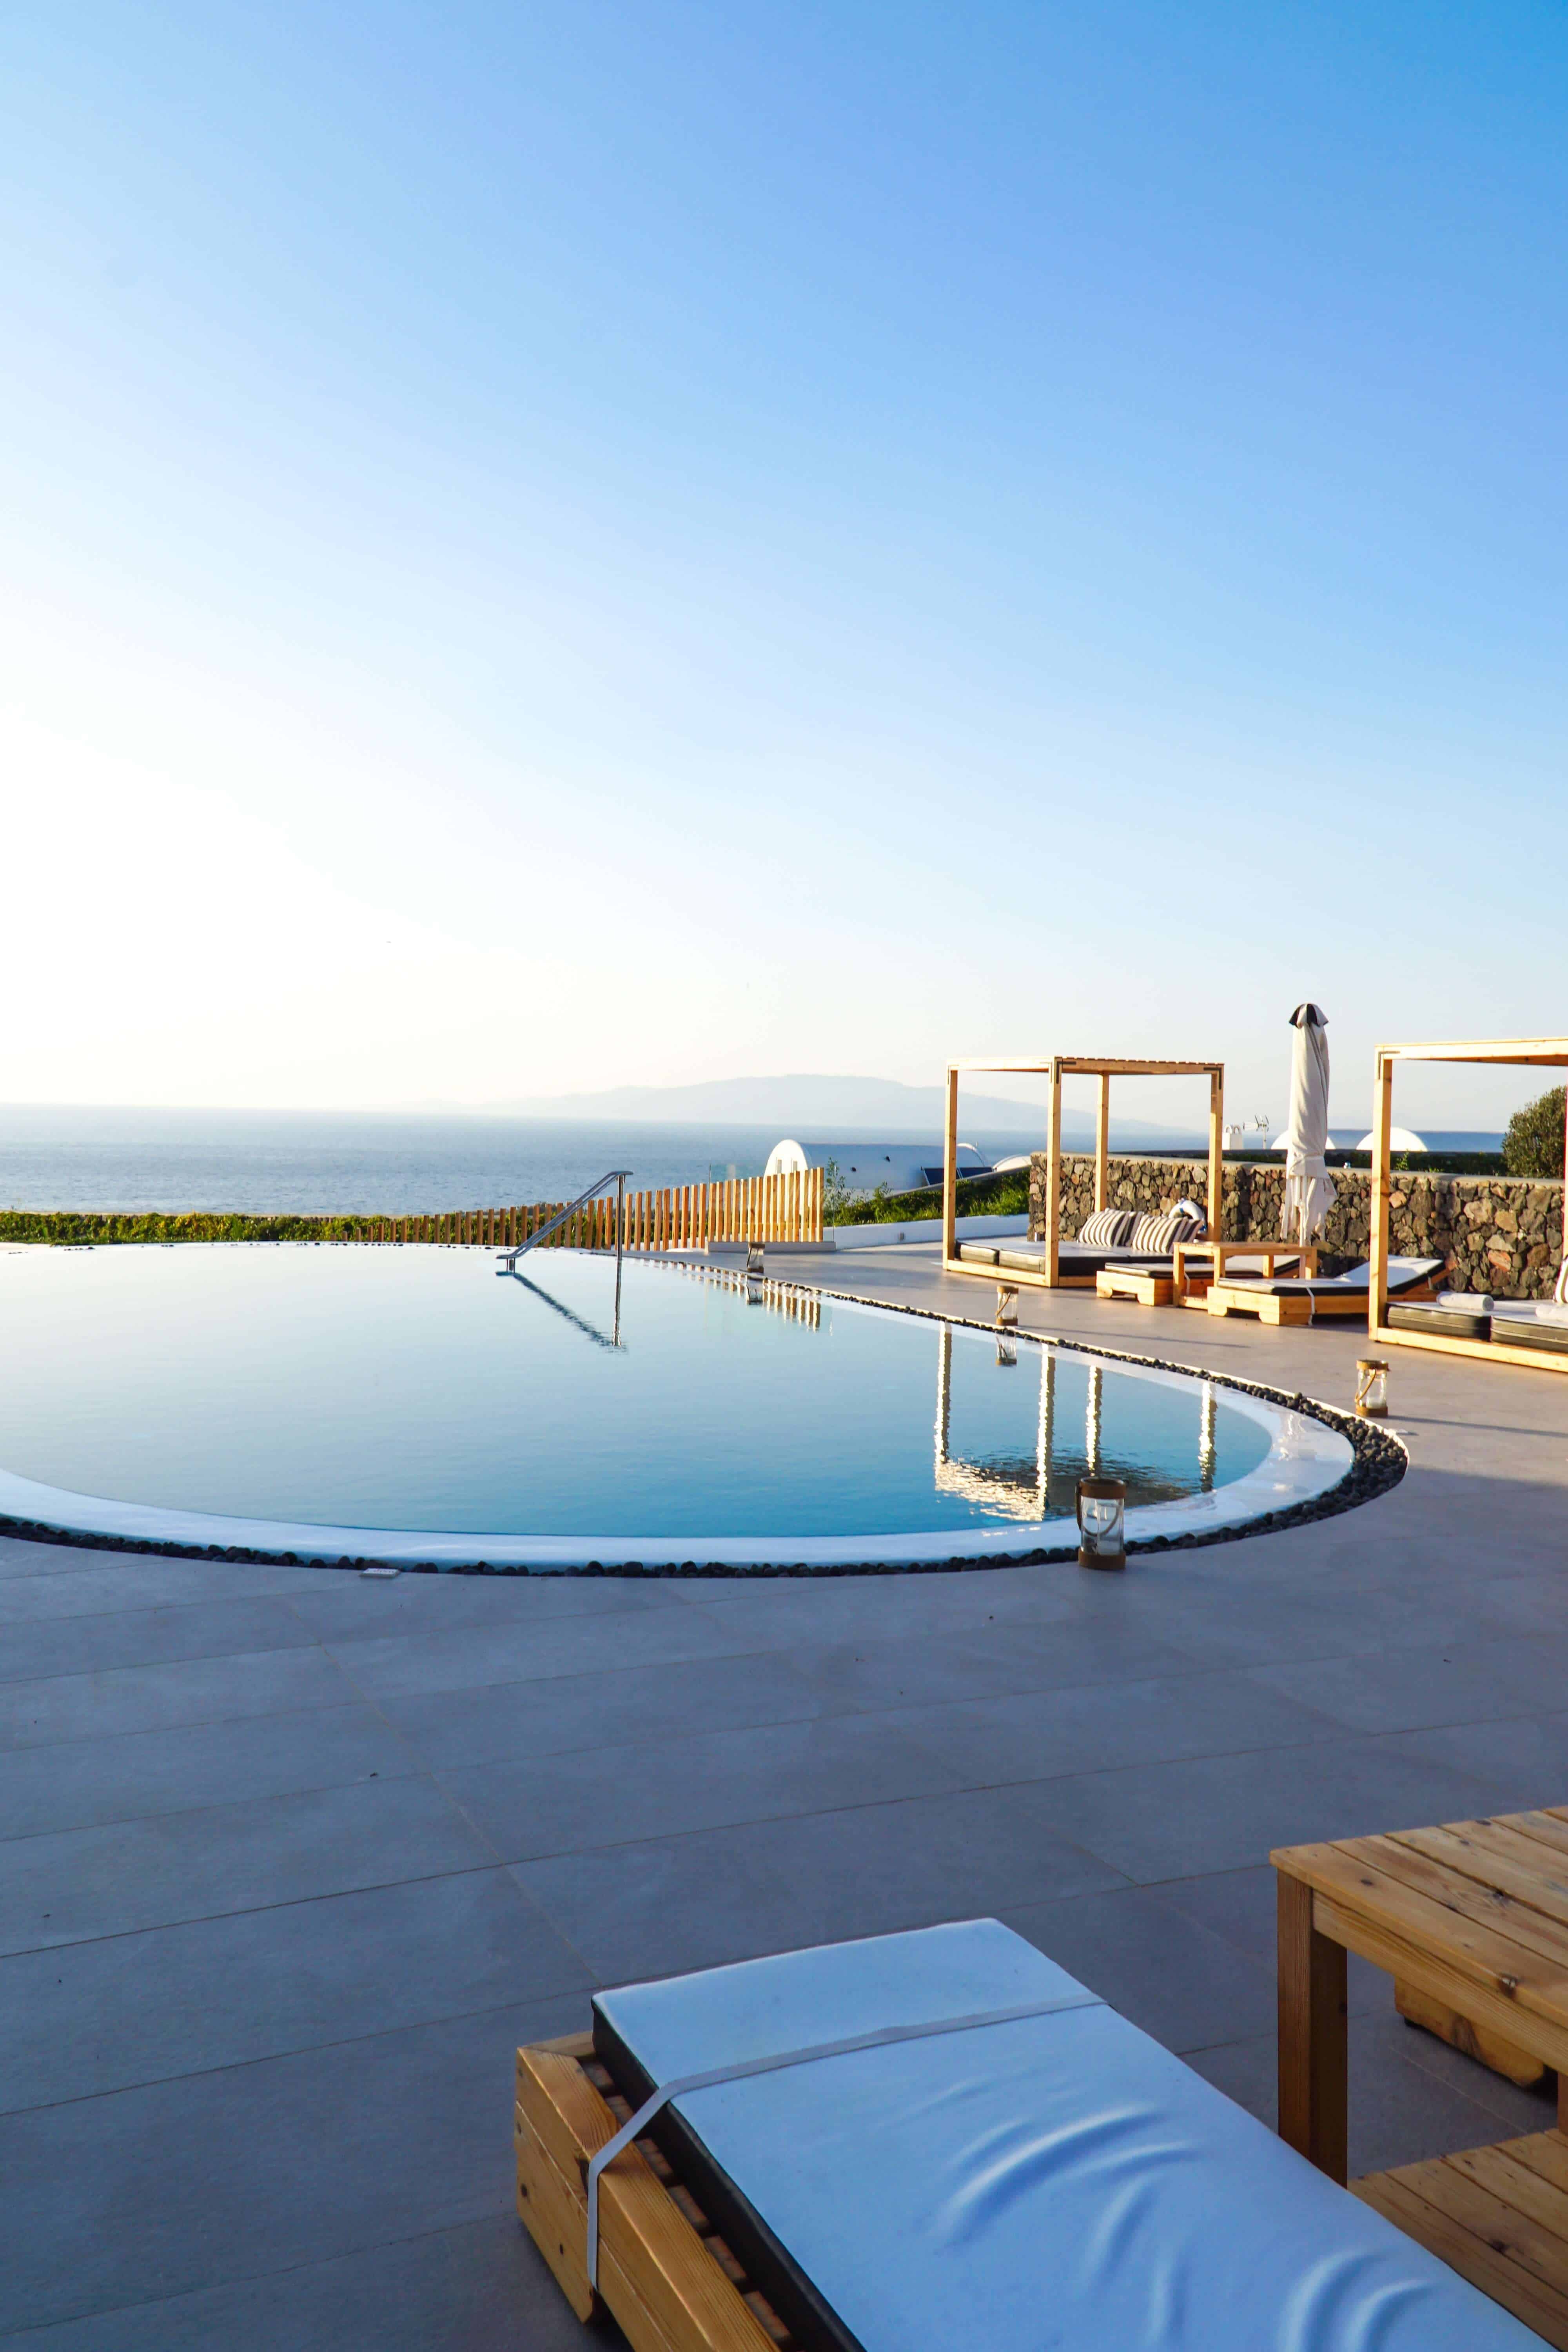 Staying at Elea Resort in Oia | The Republic of Rose